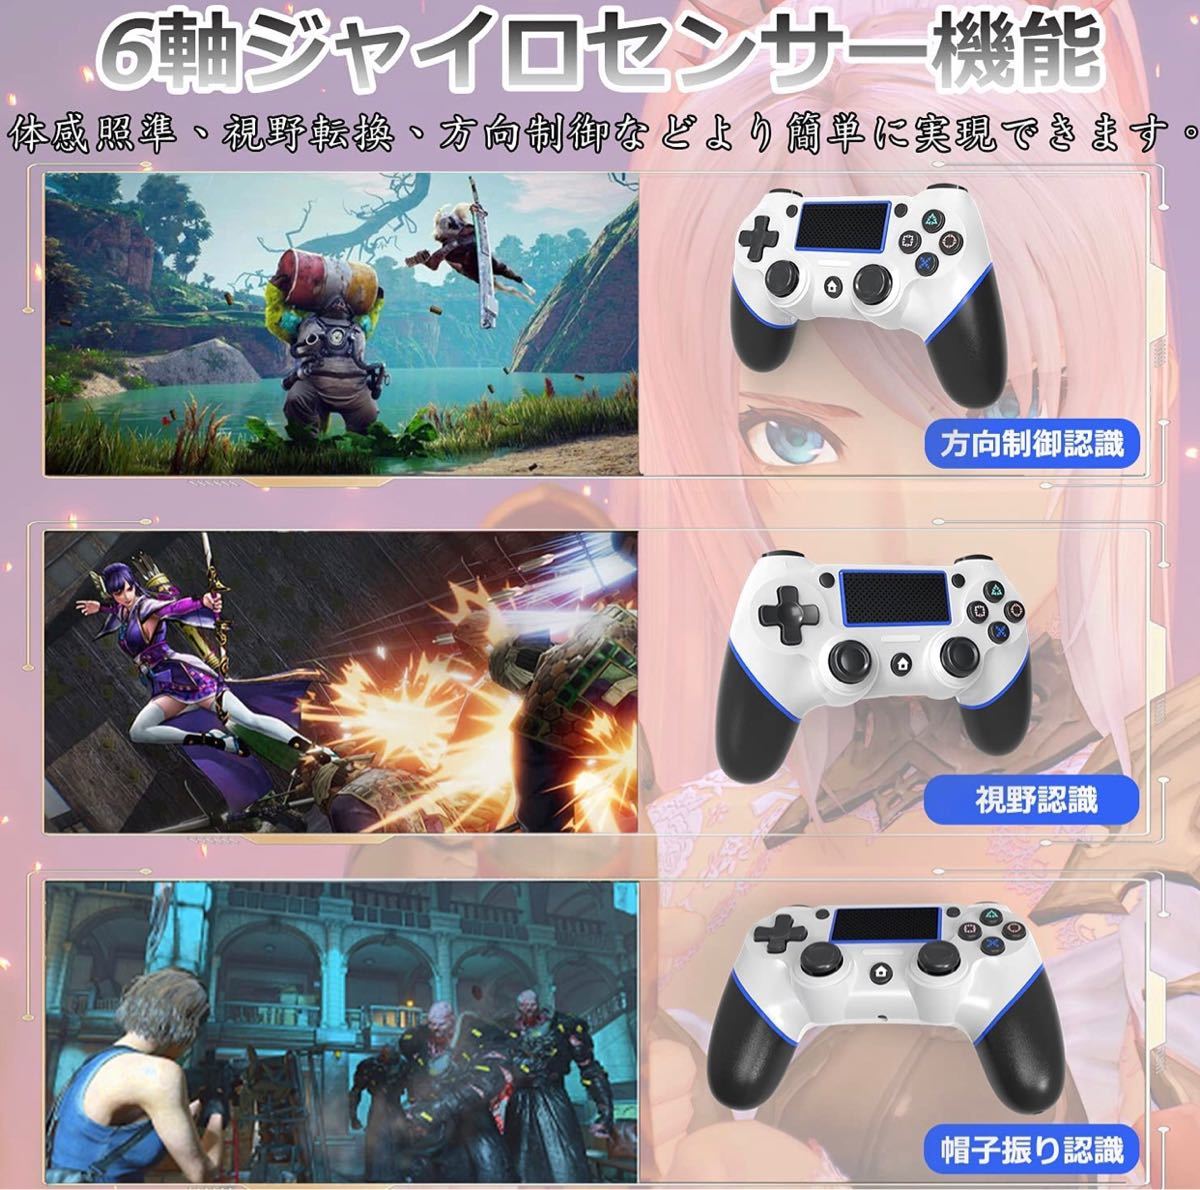 PS4 PS4コントローラー ワイヤレスコントローラー